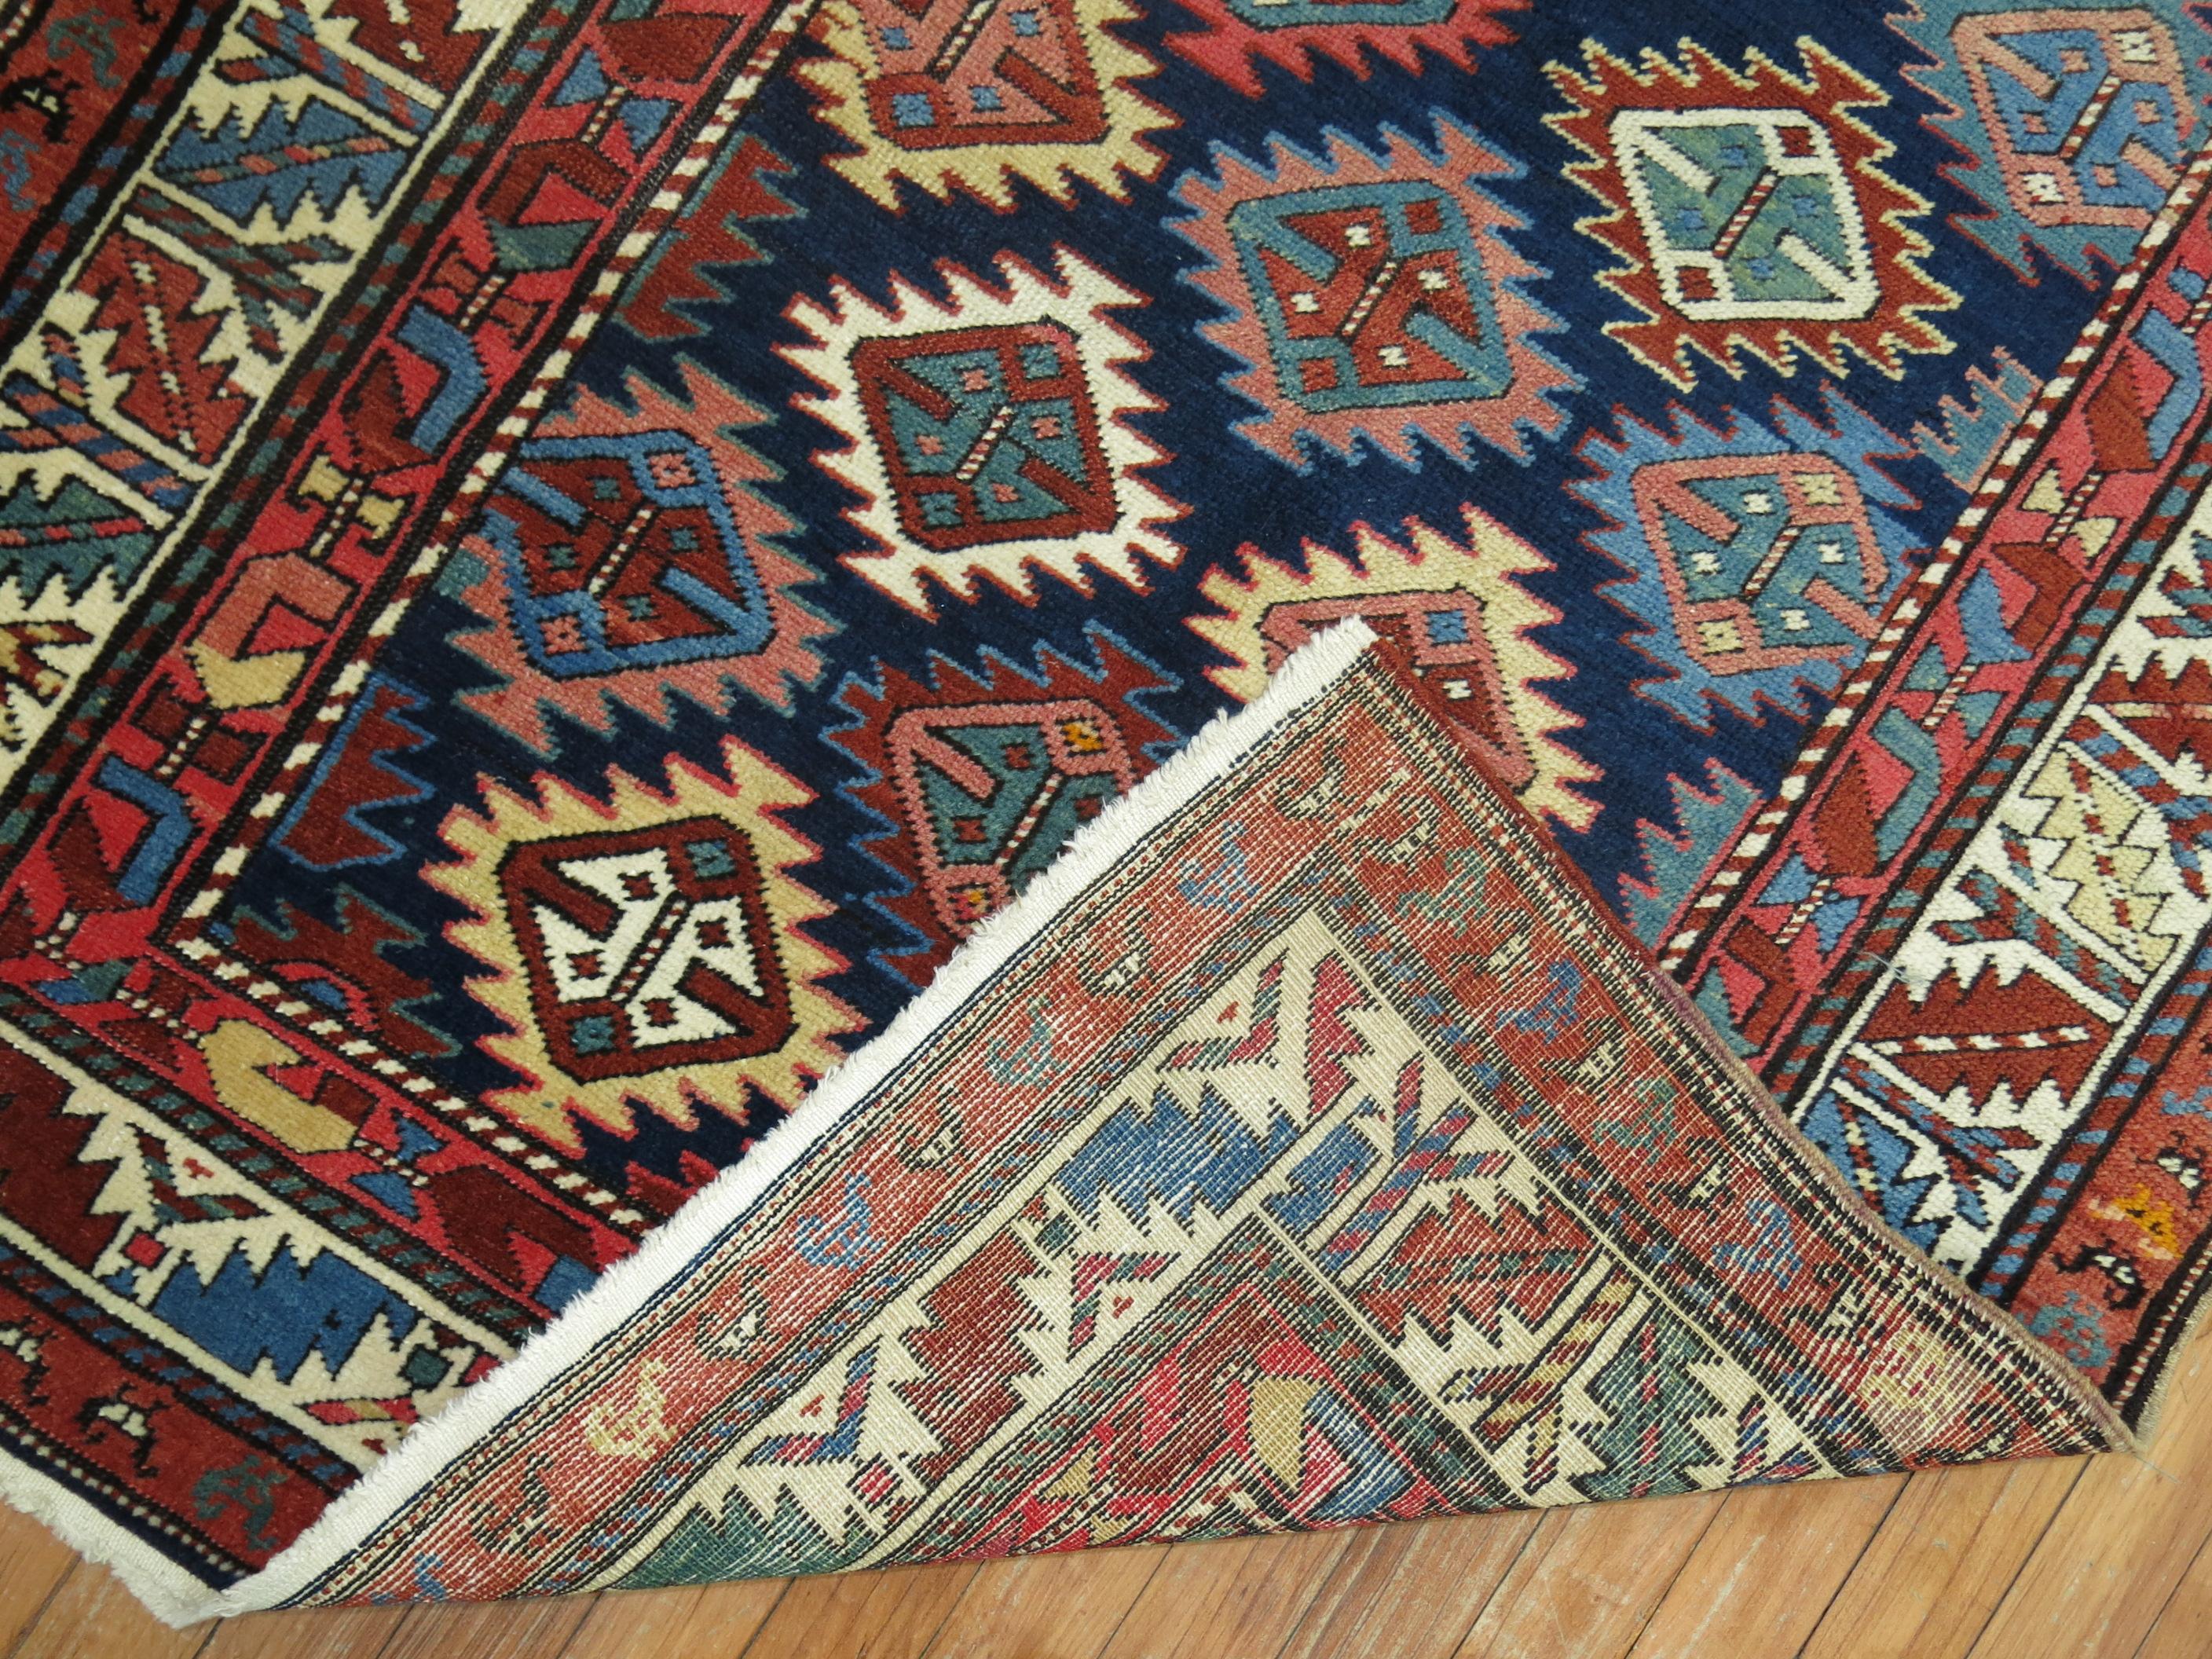 A geometric tribal looking Caucasian Shirvan rug from the early 20th century. Colorful geometric design on a navy blue field.

Antique Caucasian rugs from the Shirvan district village are still considered one of the best decorative and collector